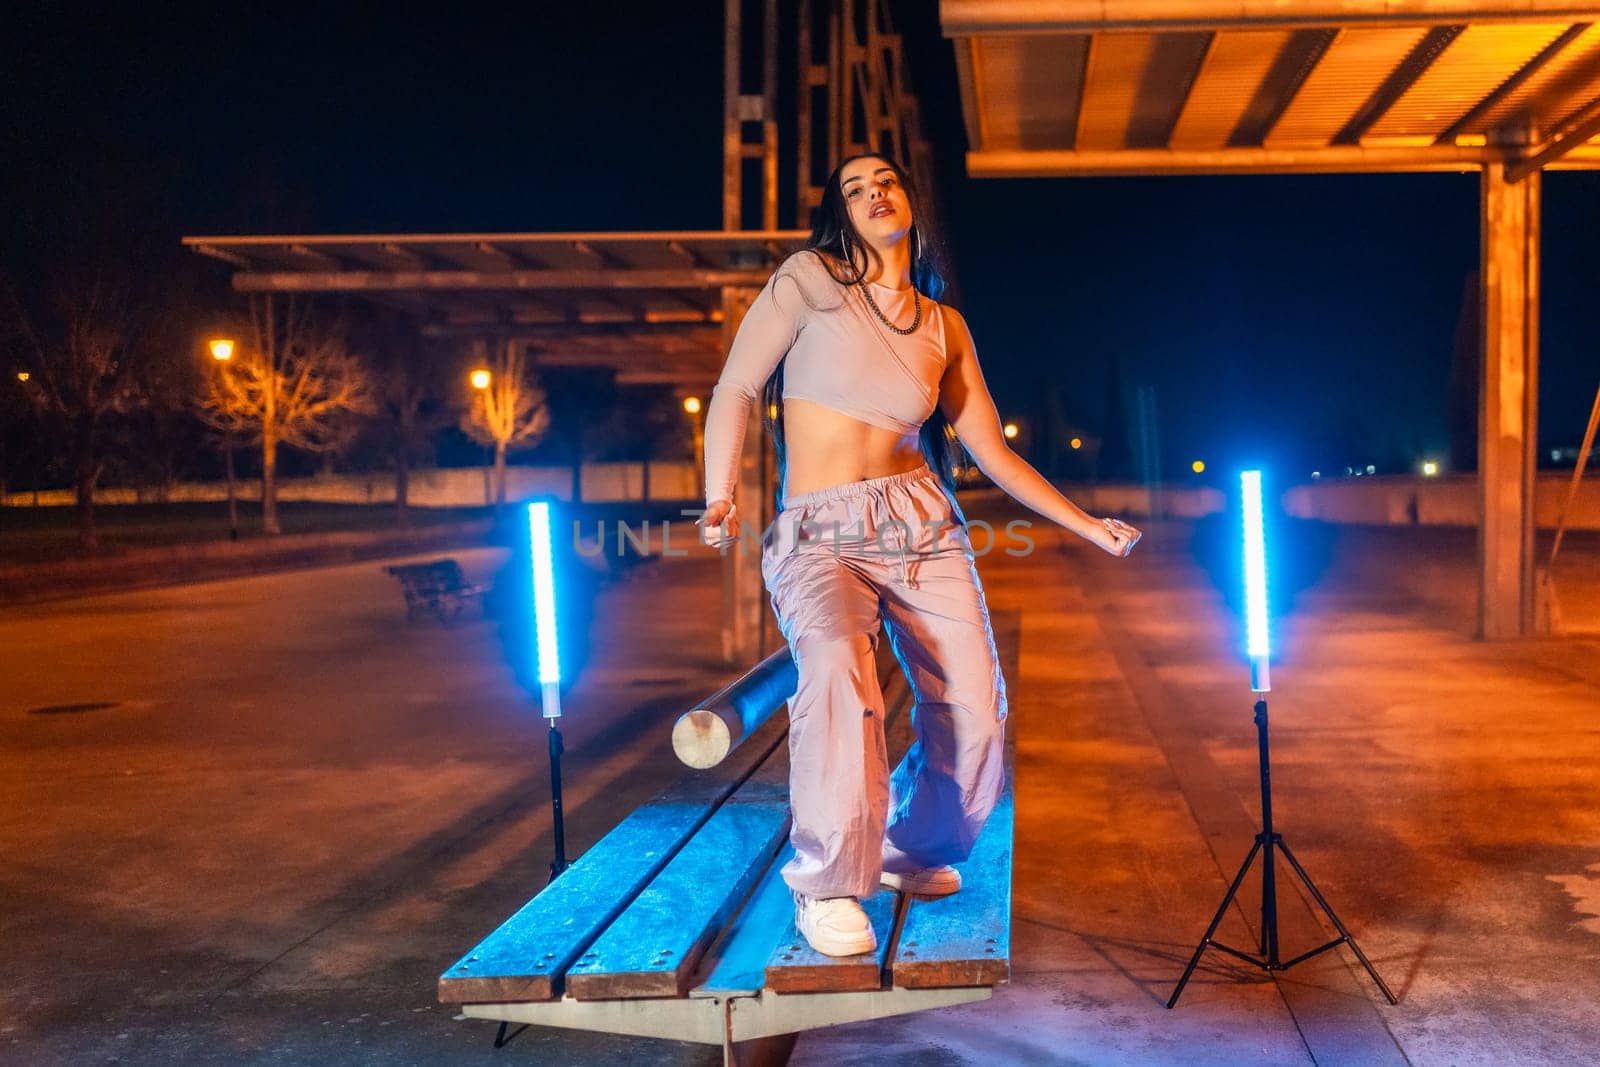 Trap artist dancing on a park table at night by Huizi